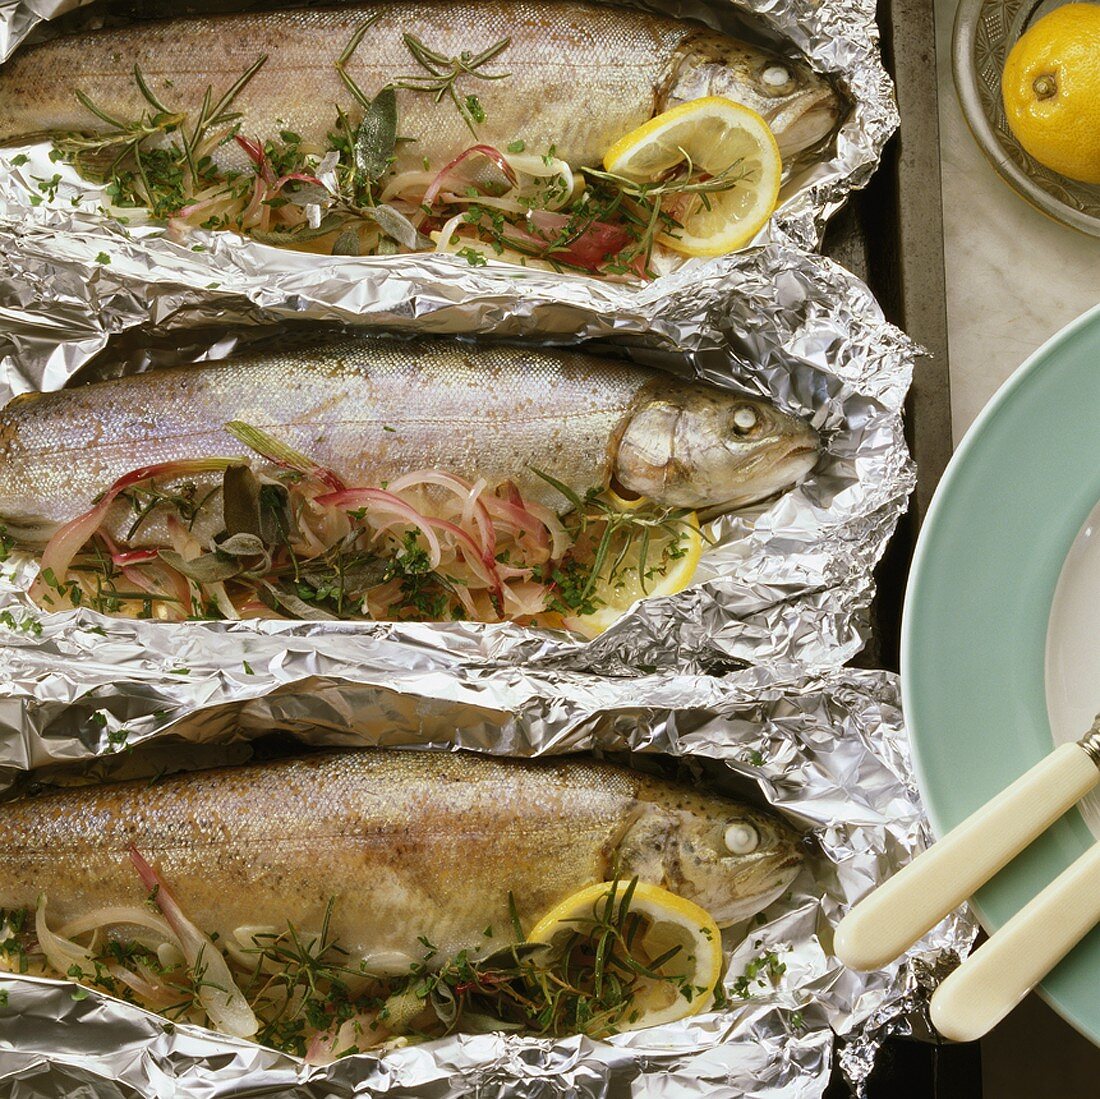 Trout with herbs and red onions, baked in foil